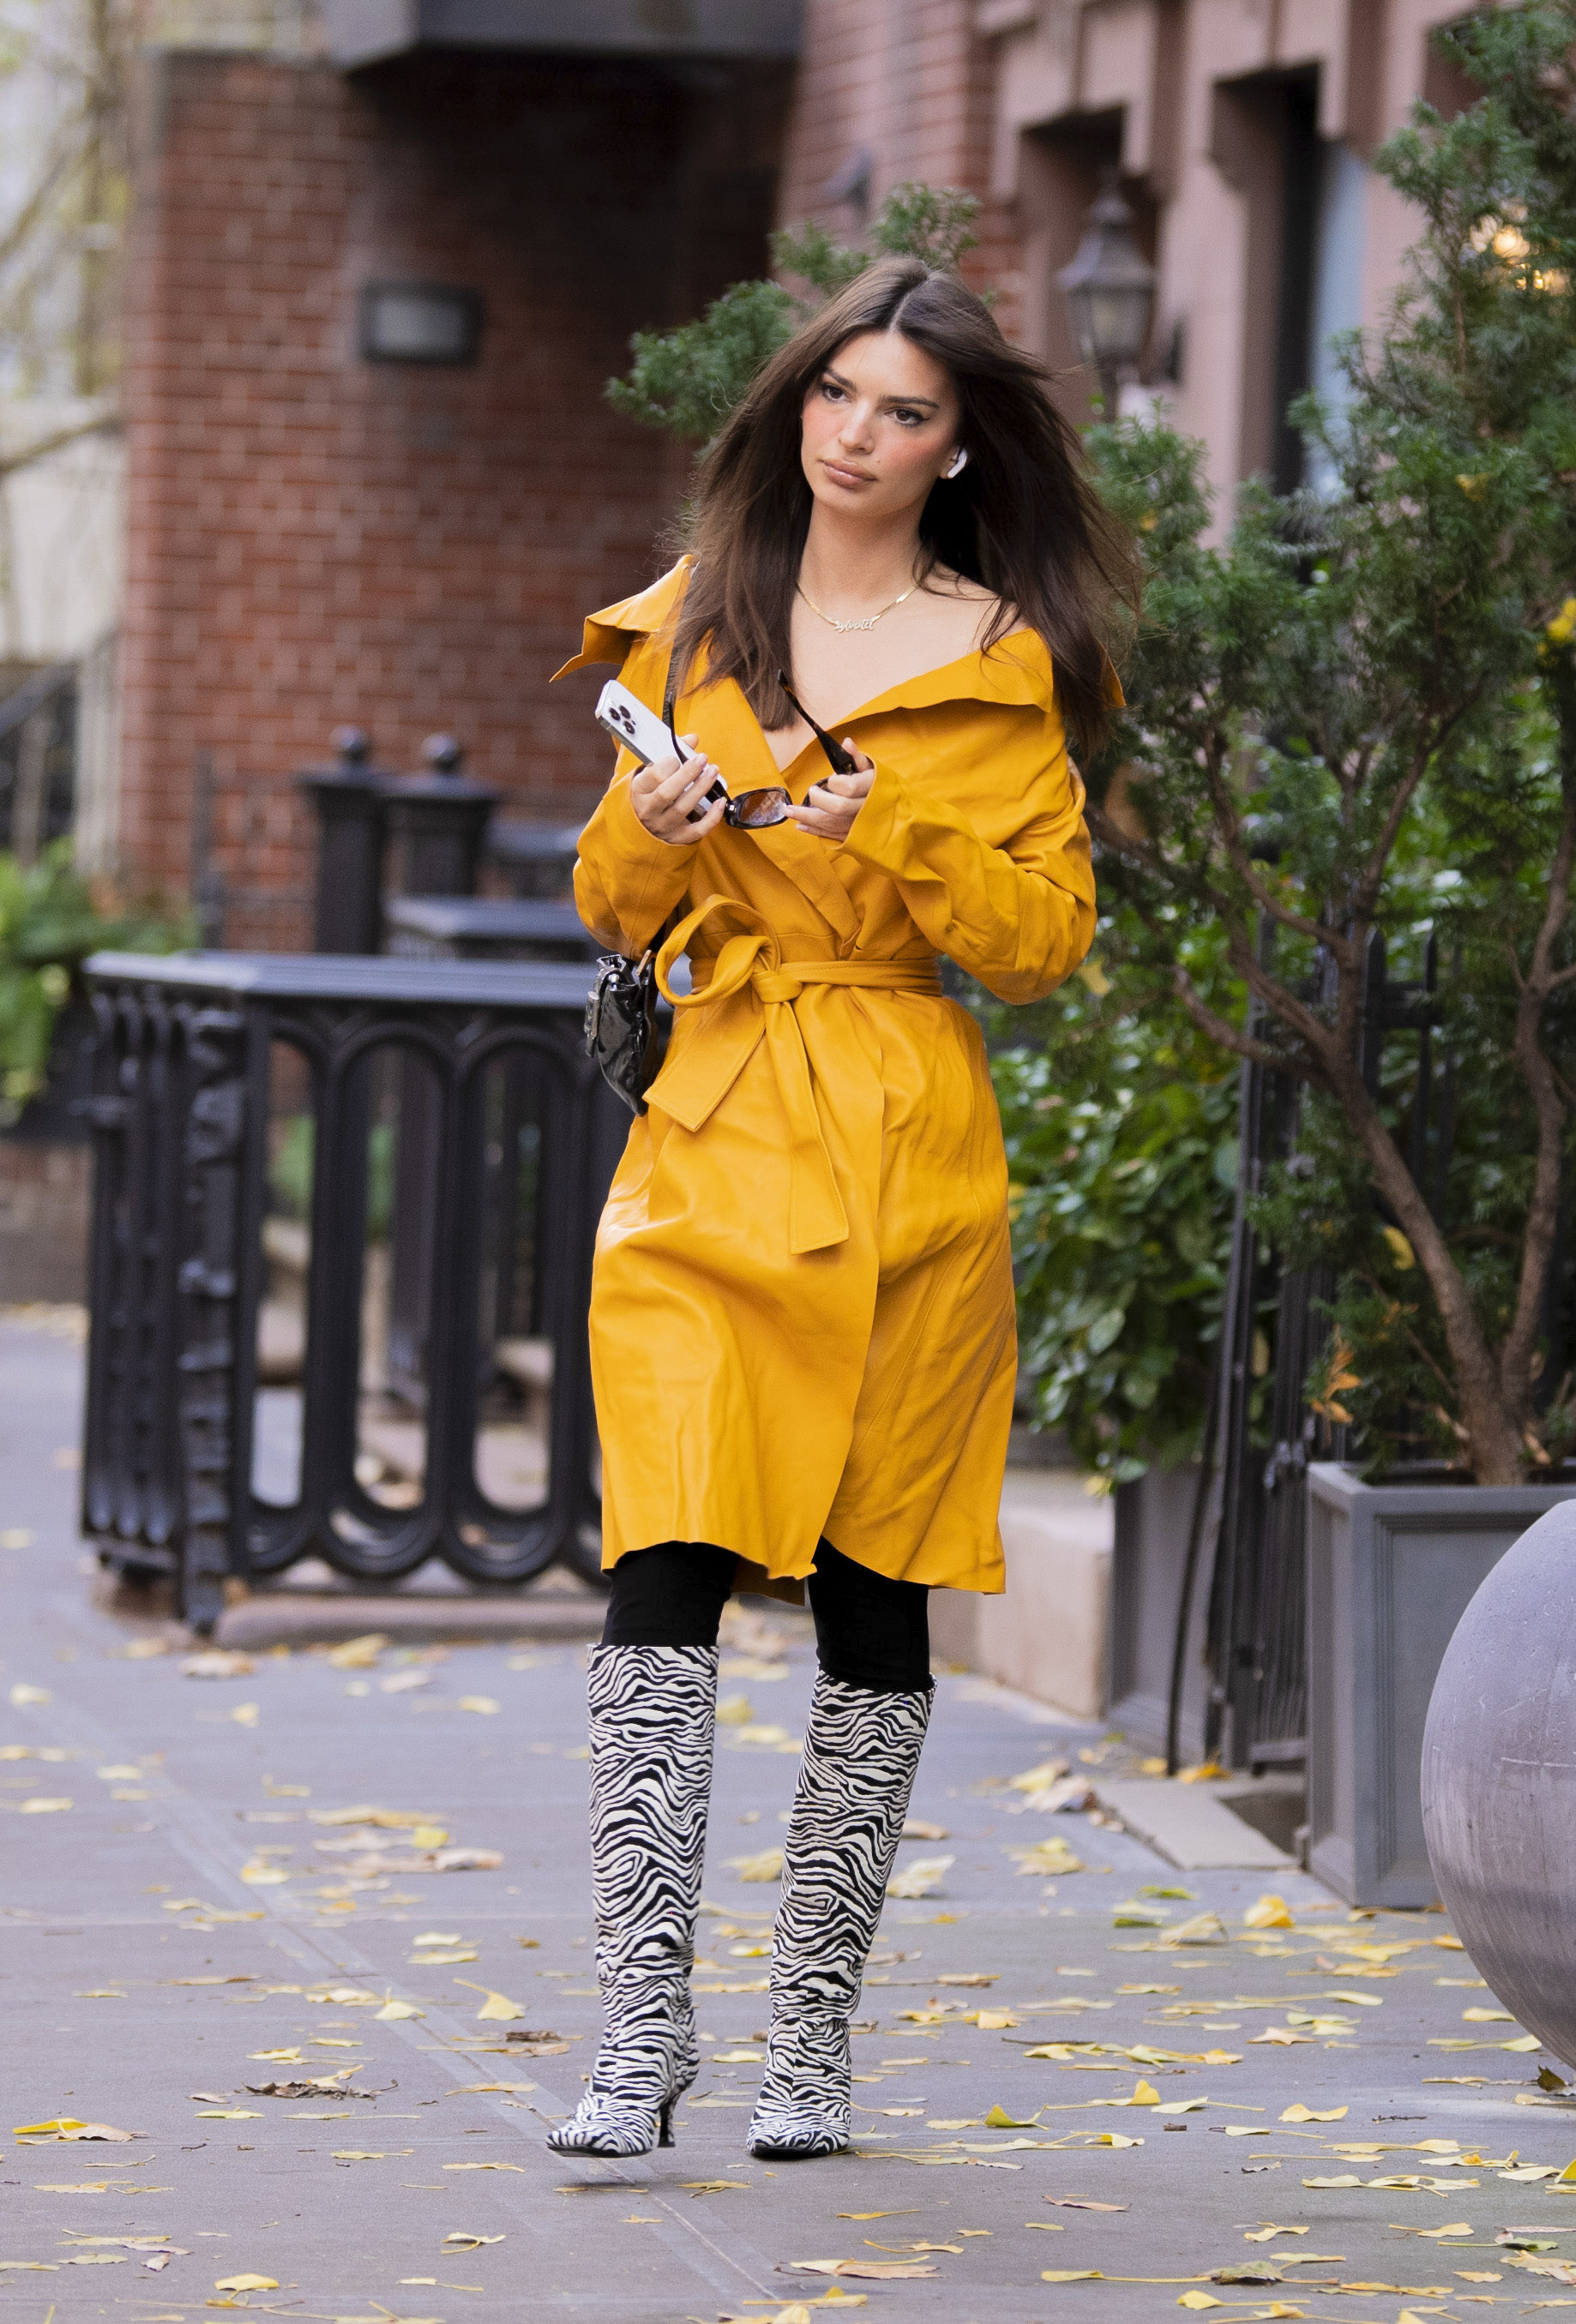 Photo © 2022 Splash News/The Grosby Group New York, November 28, 2022 Emily Ratajkowski turns heads in citrus toned trench and zebra print boots as she steps out in NYC after her weekend date with Pete Davidson*** Emily Ratajkowski turns heads with a citrus-toned trench coat and zebra-print boots while sipping her iced coffee in New York City after going public with her new relationship with Pete Davidson.